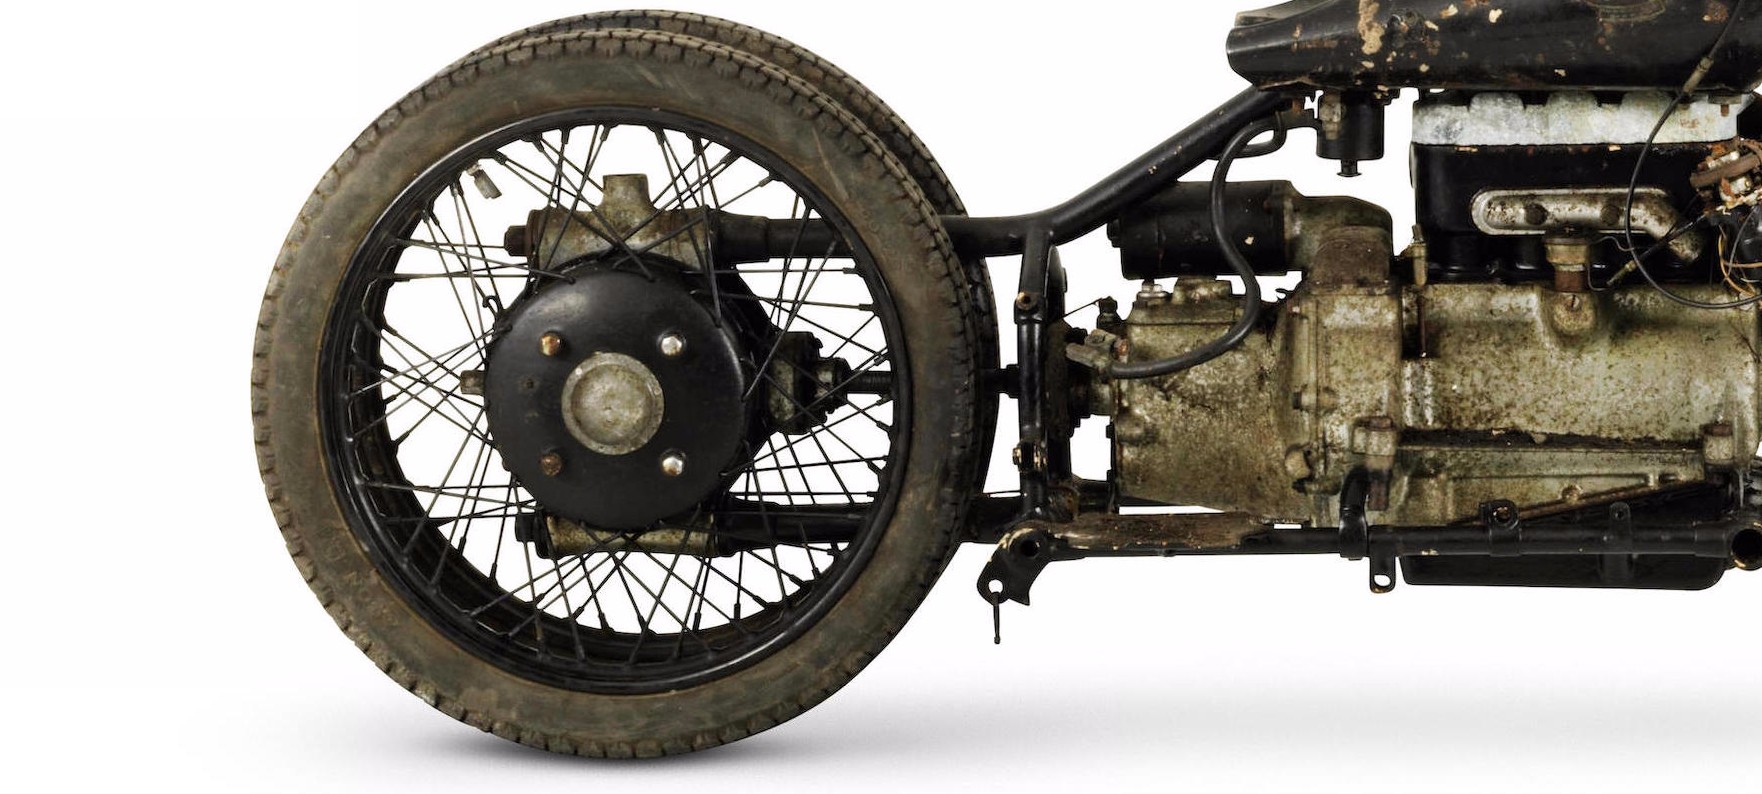 old-brough-superior-bikes-thought-lost-discovered-now-worth-a-small-fortune-photo-gallery_10-autonovosti.me-6